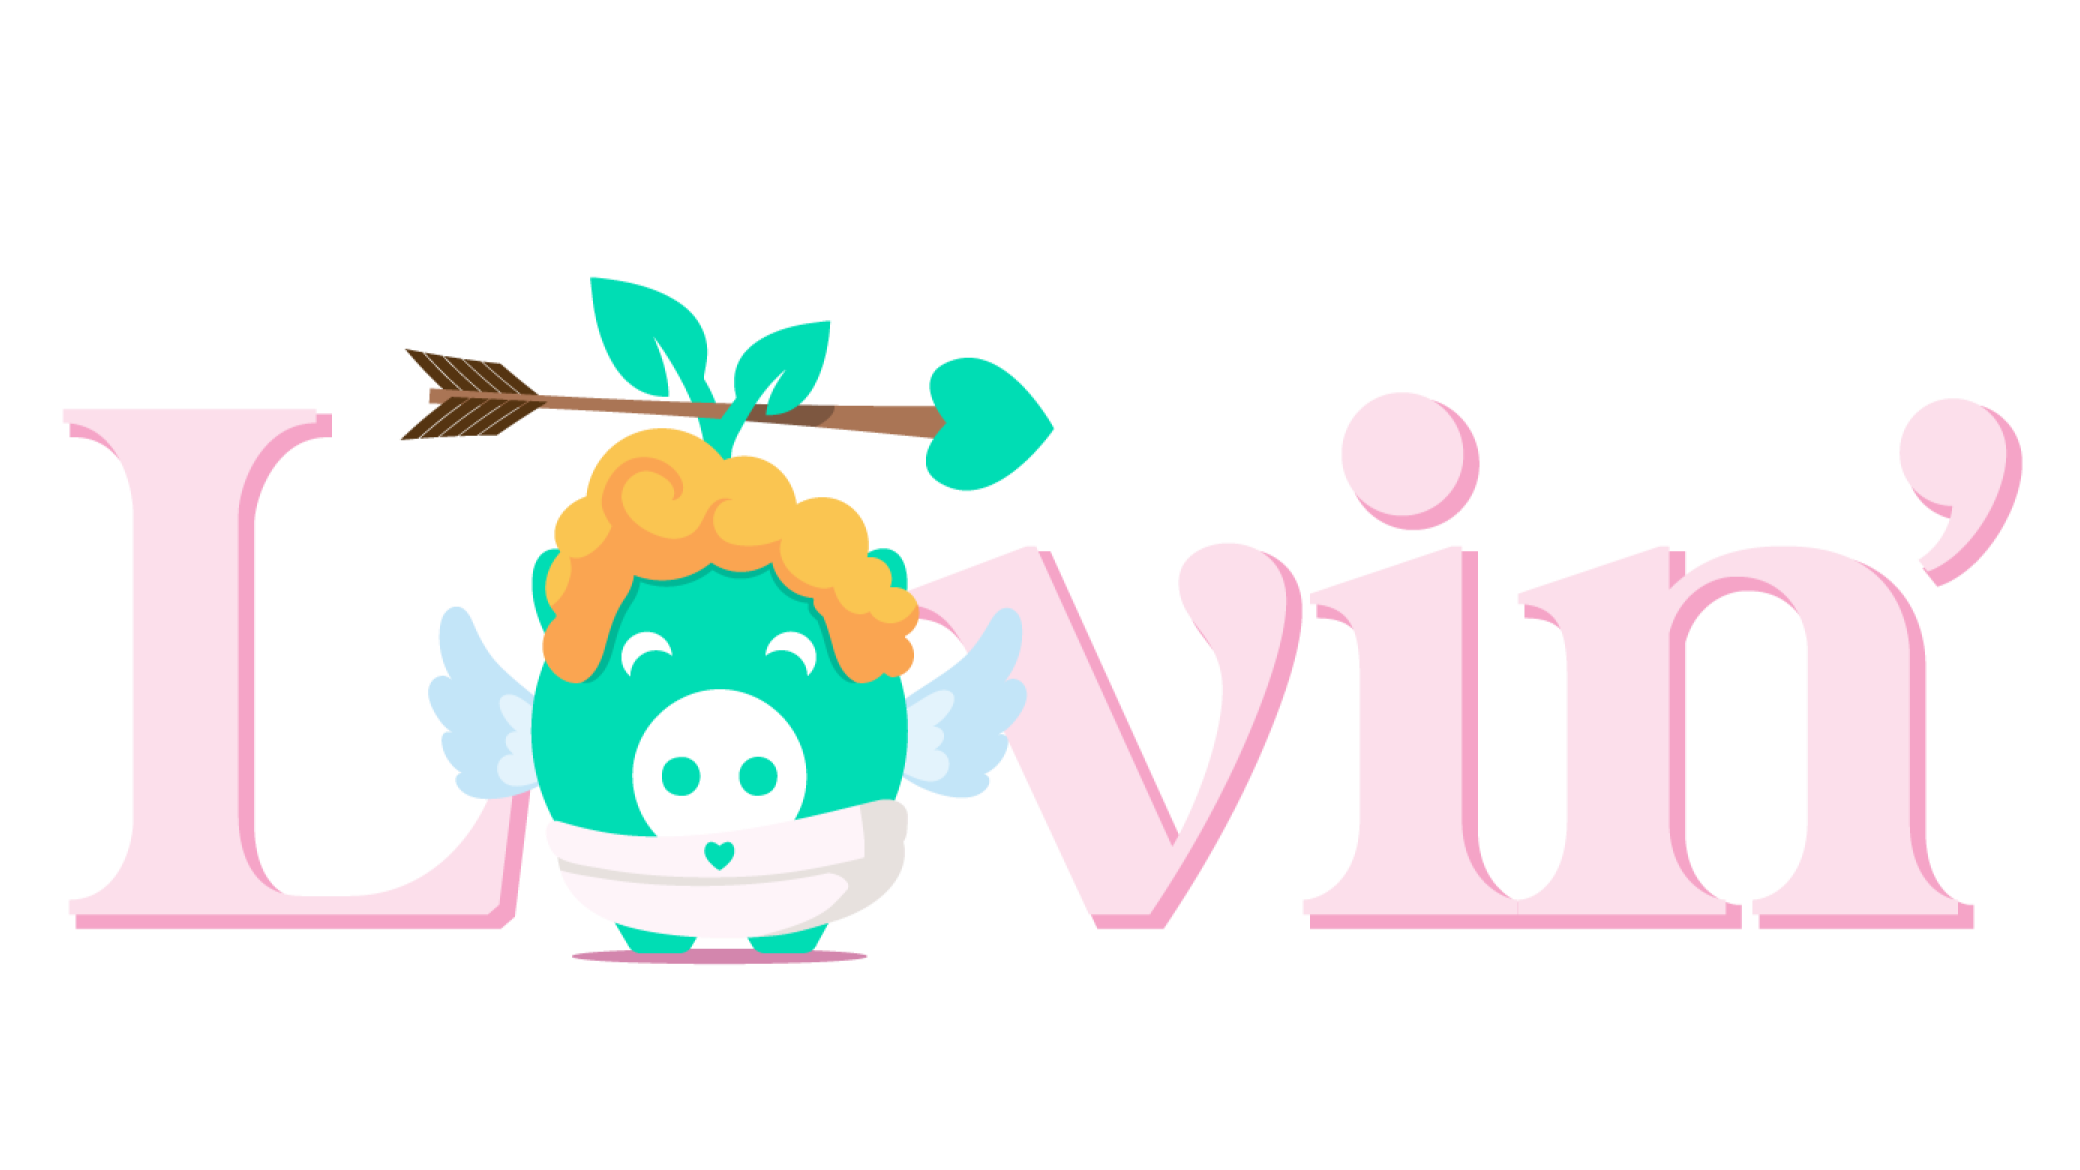 (Gird your loins!) It's time for some serious Loving' You guessed it... It's Tippy Lovin' time!